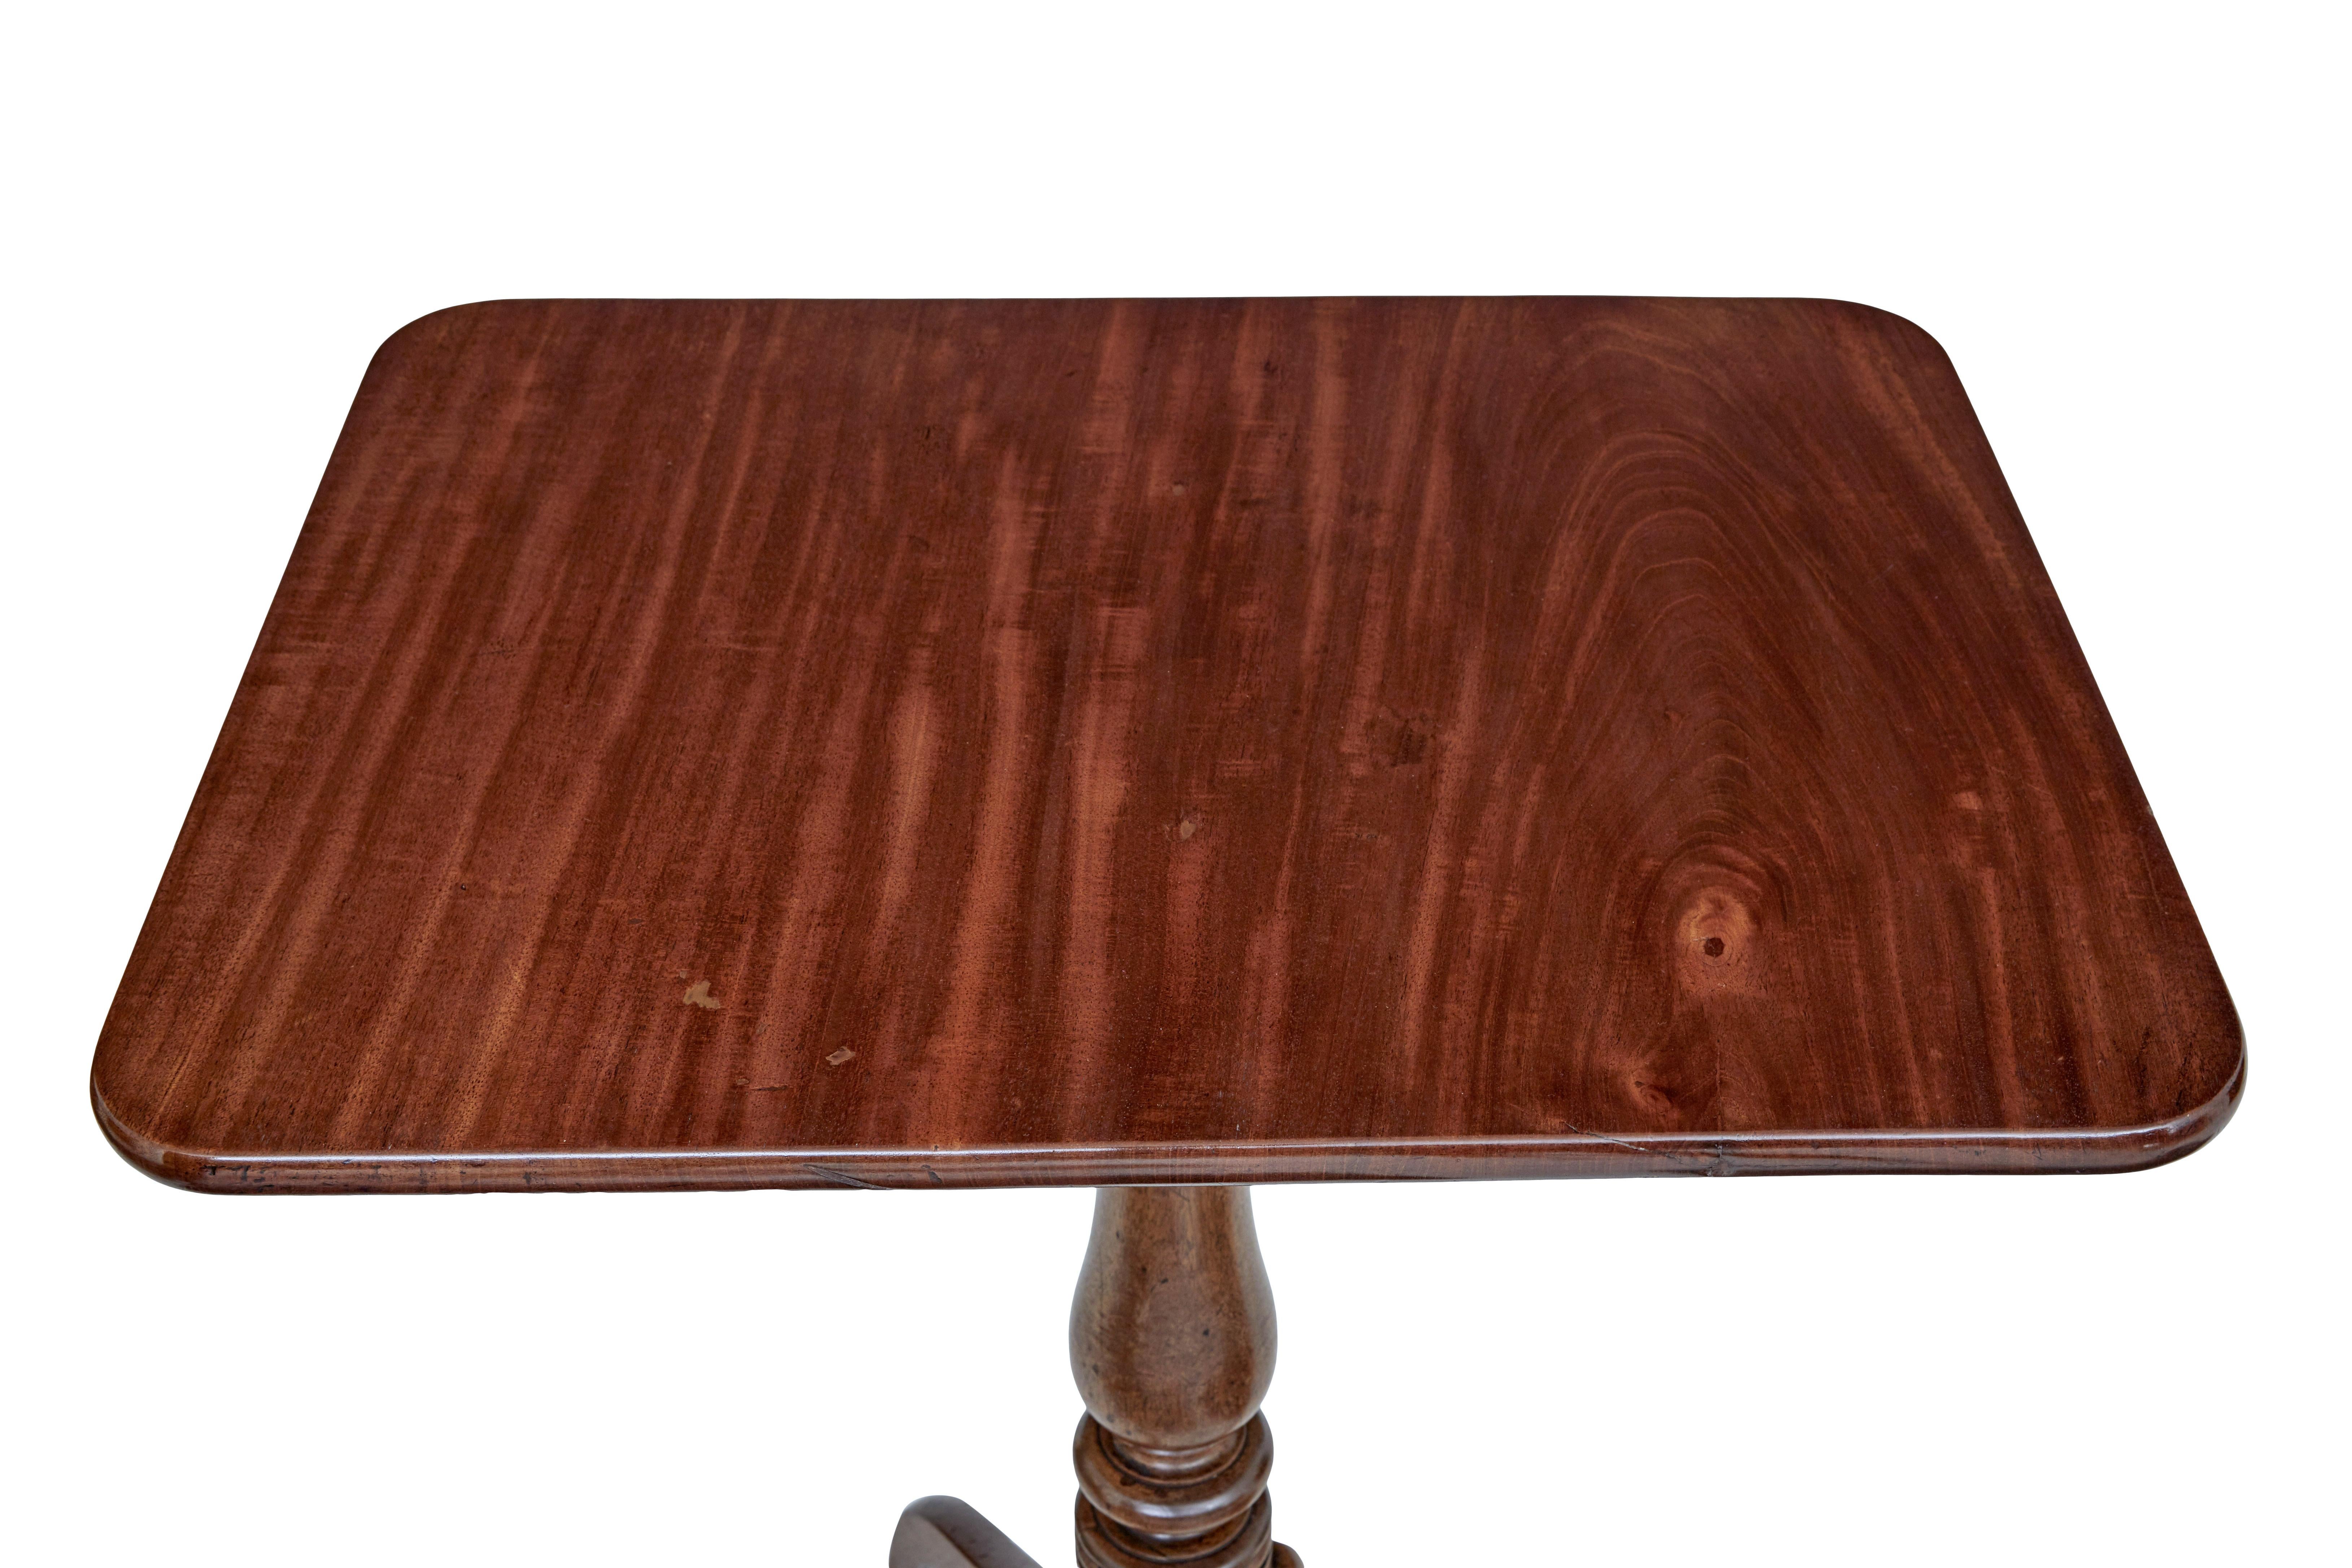 Turned Early 19th Century Tilt-Top Occasional Table